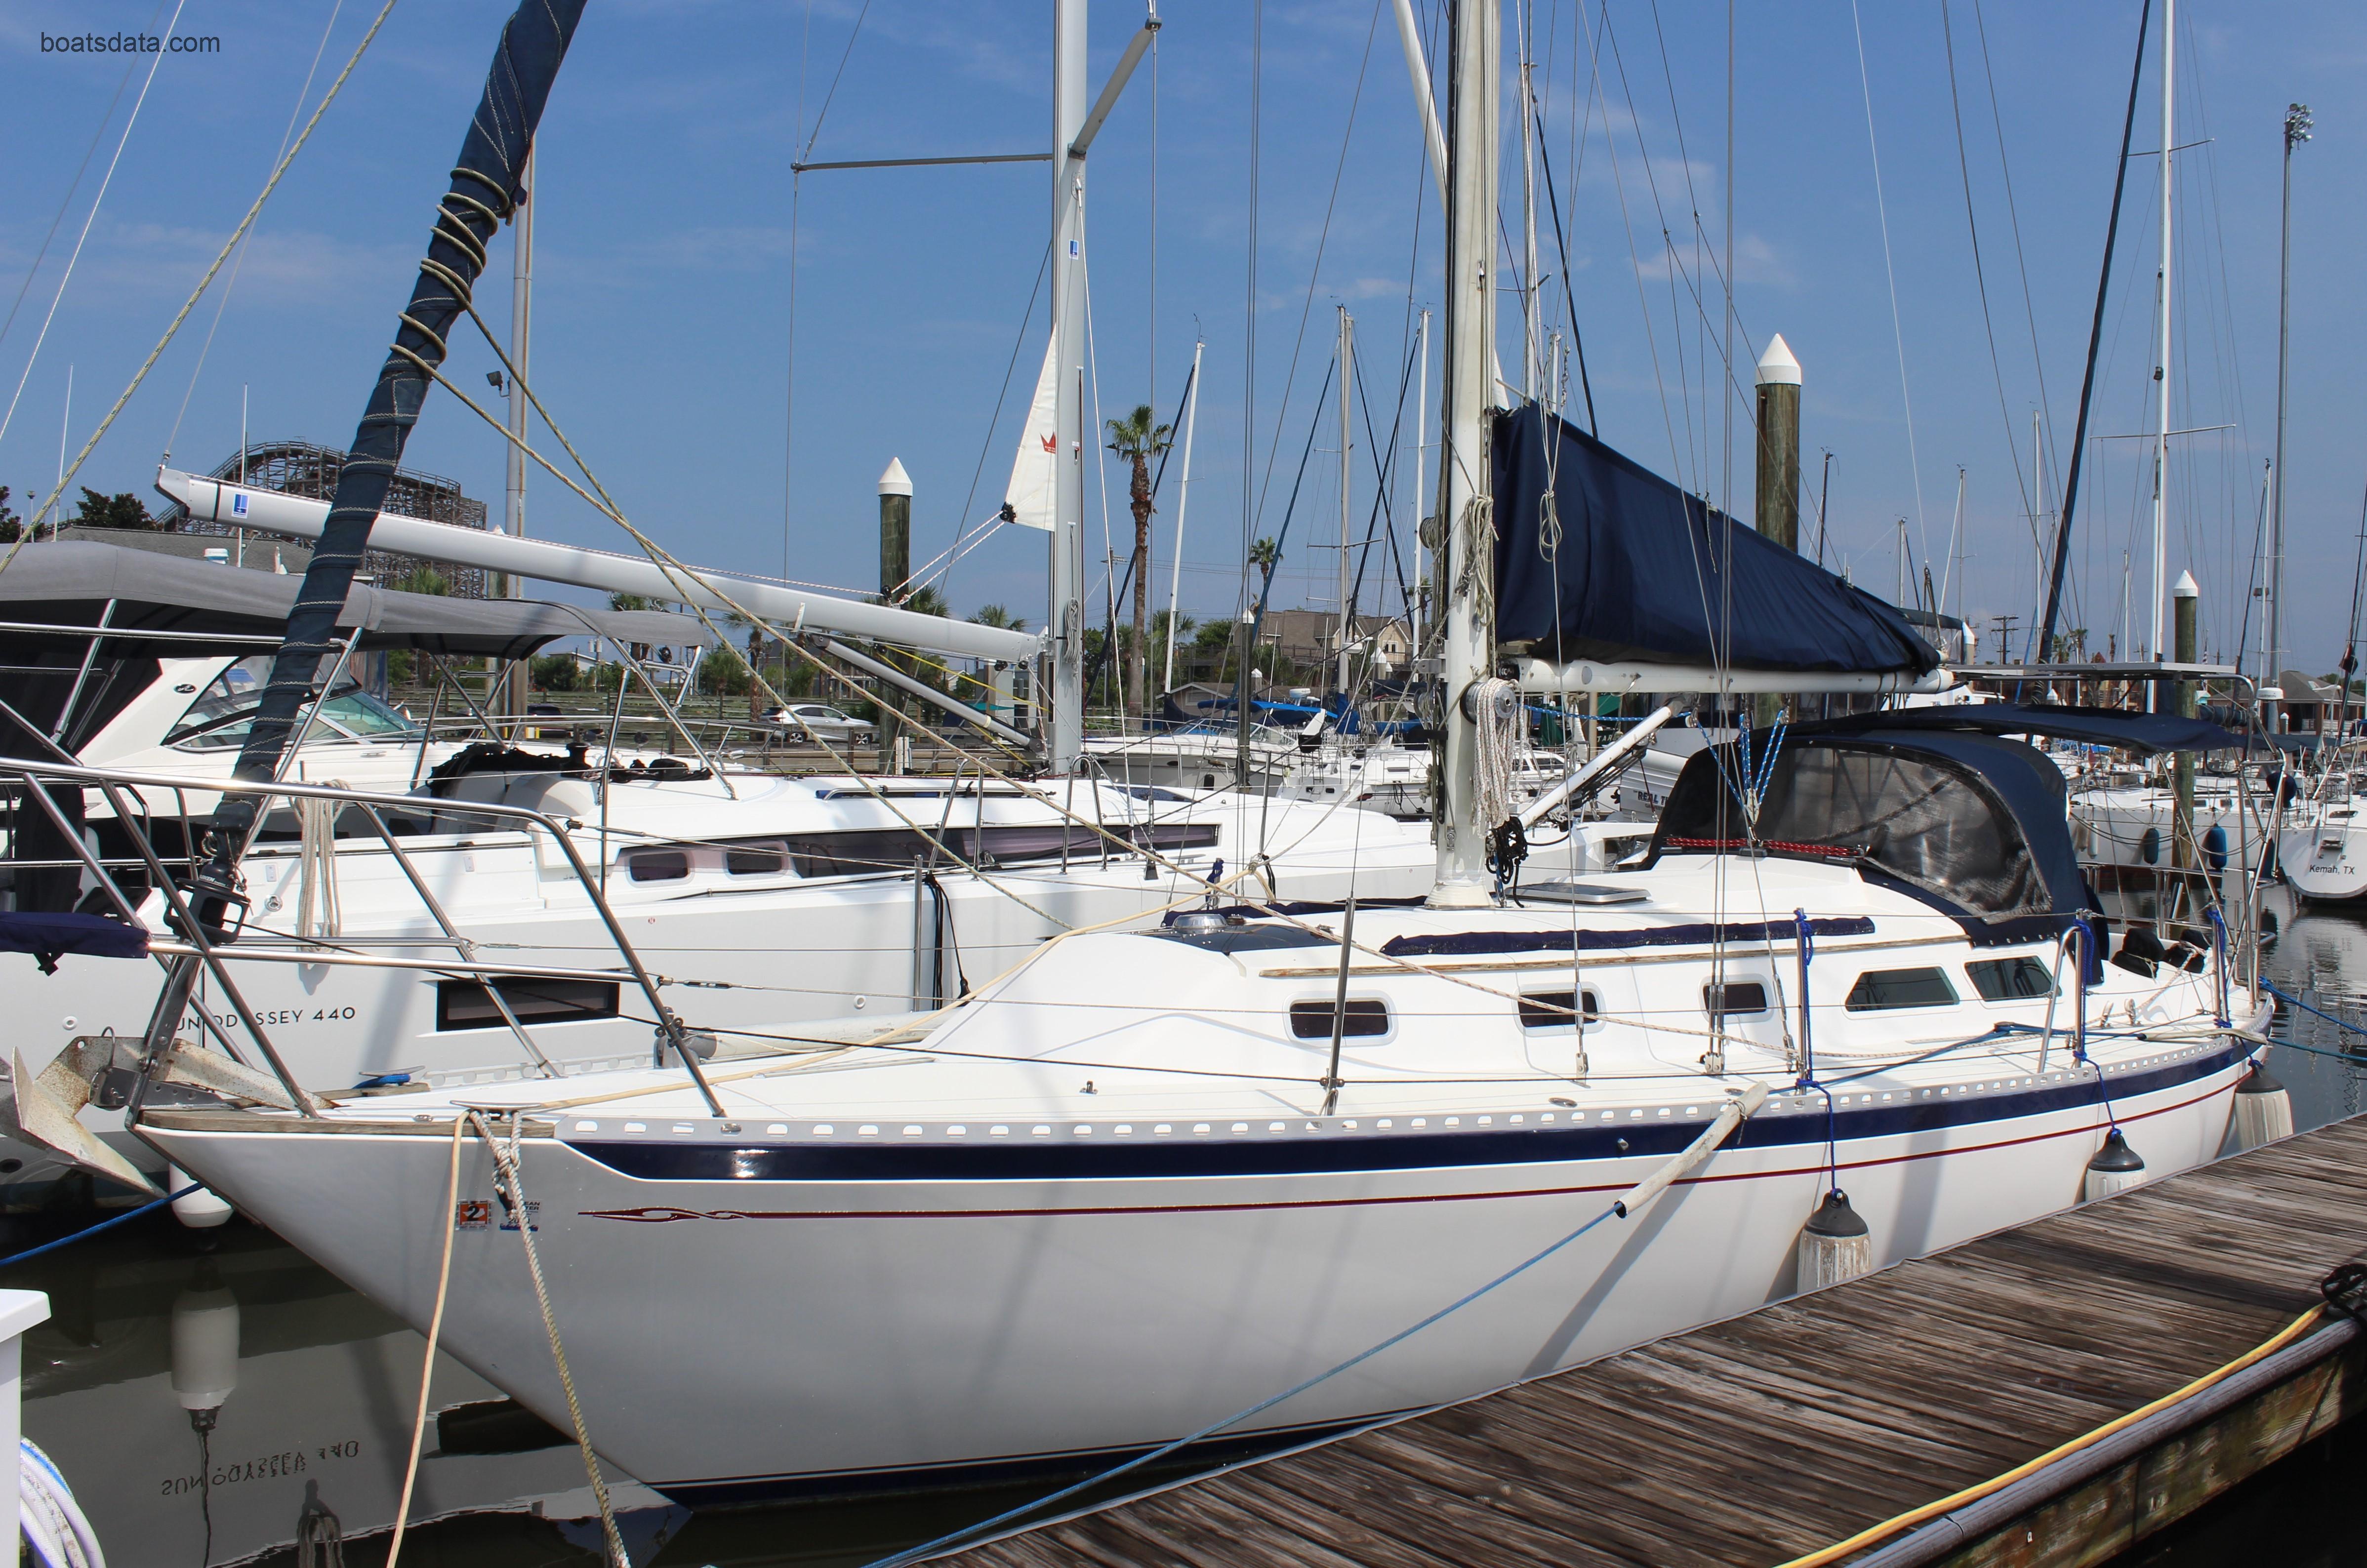 Islander Sloop tv detailed specifications and features